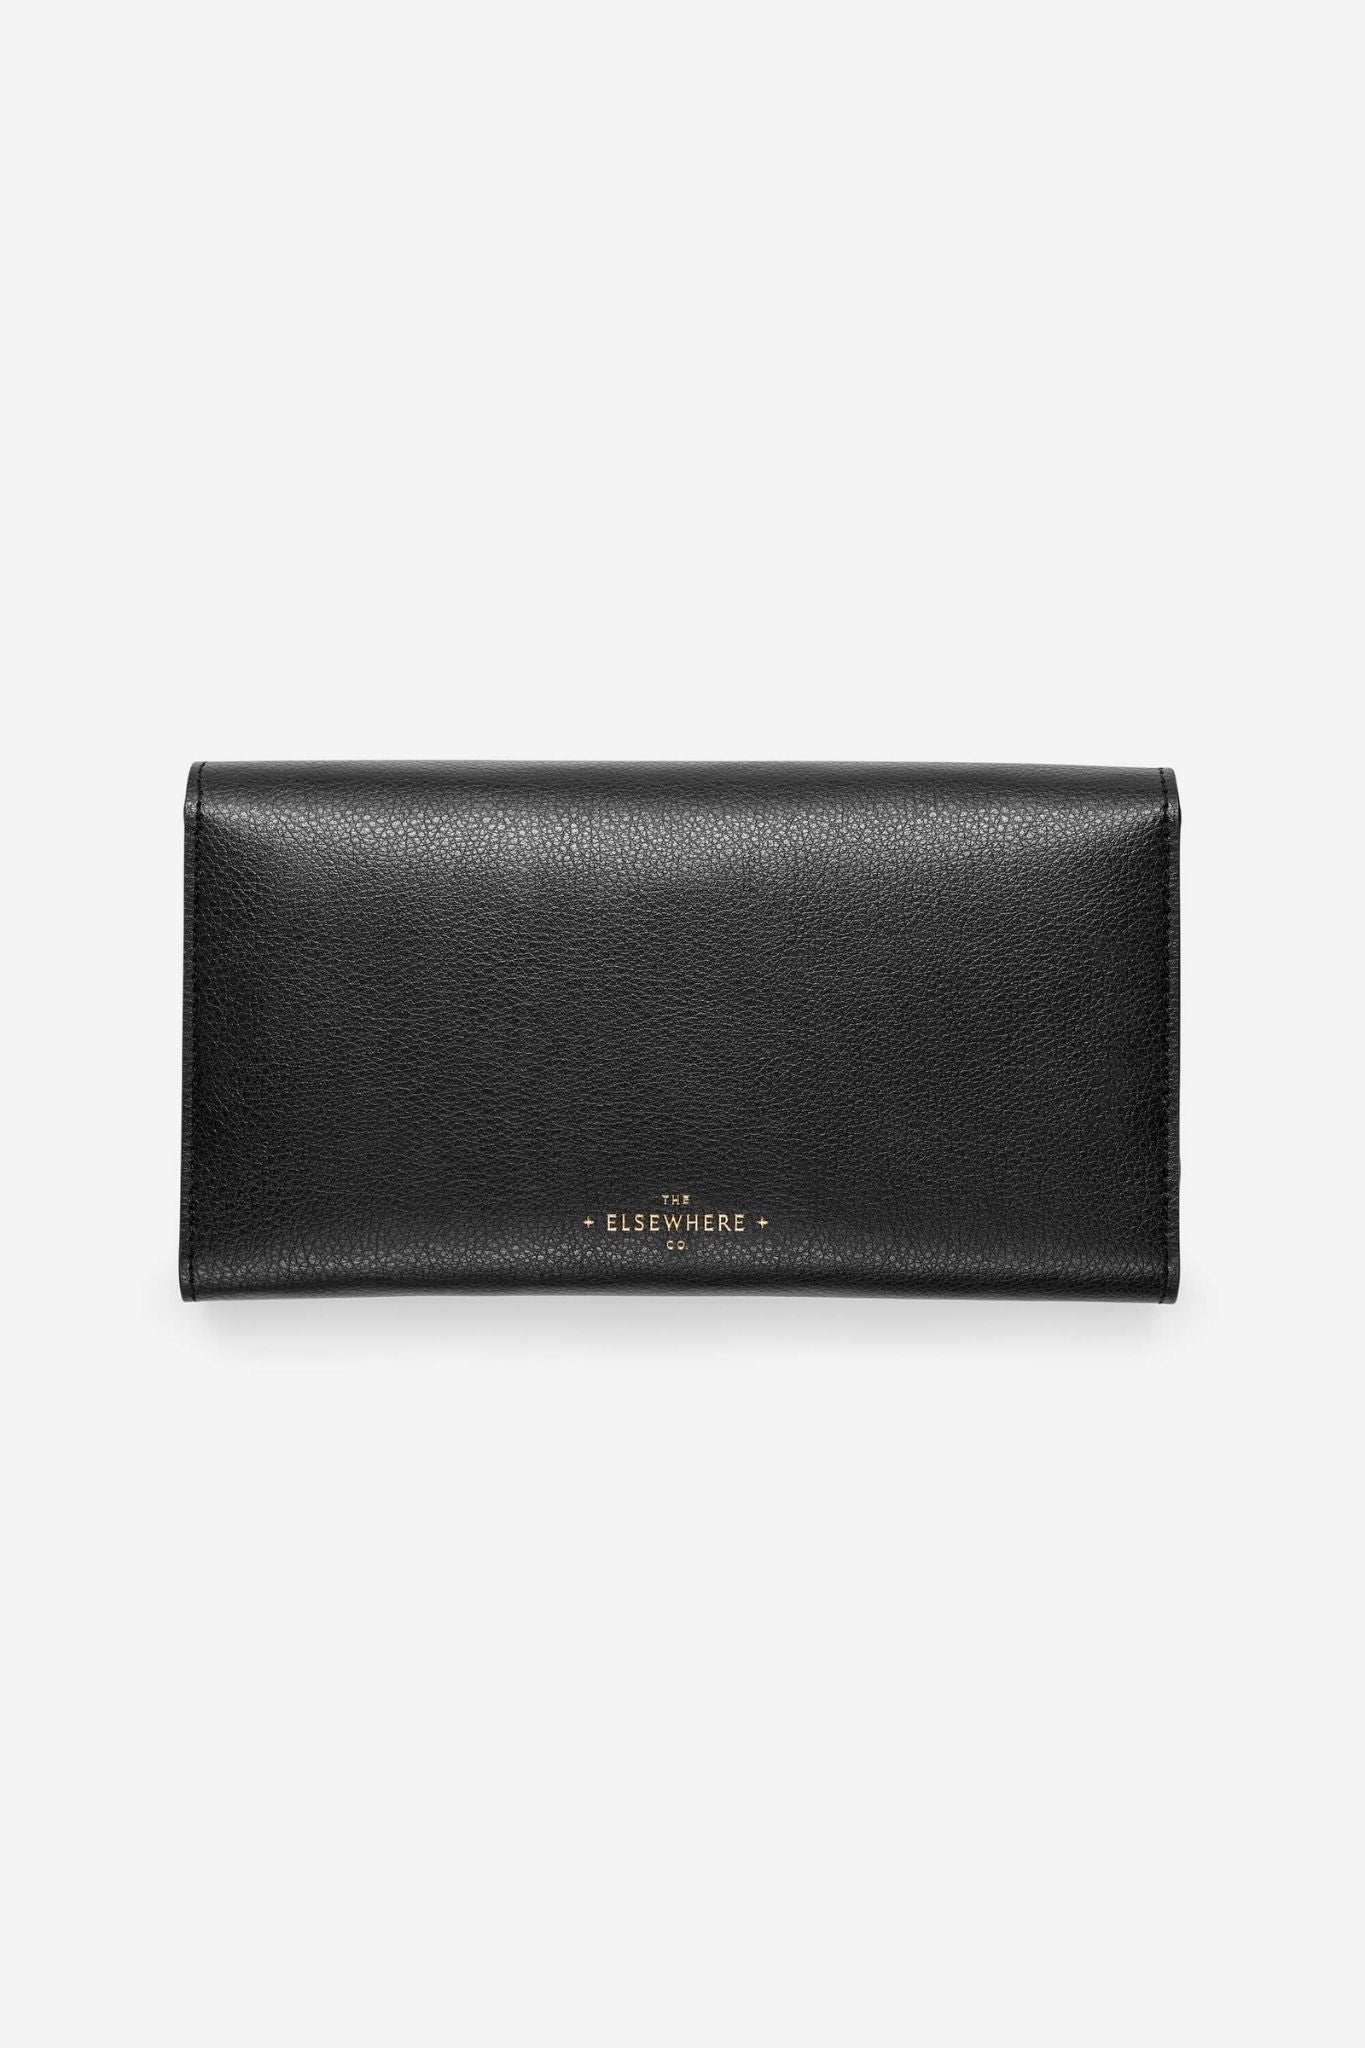 The Elsewhere Co  Women's Sustainable Leather Wallet